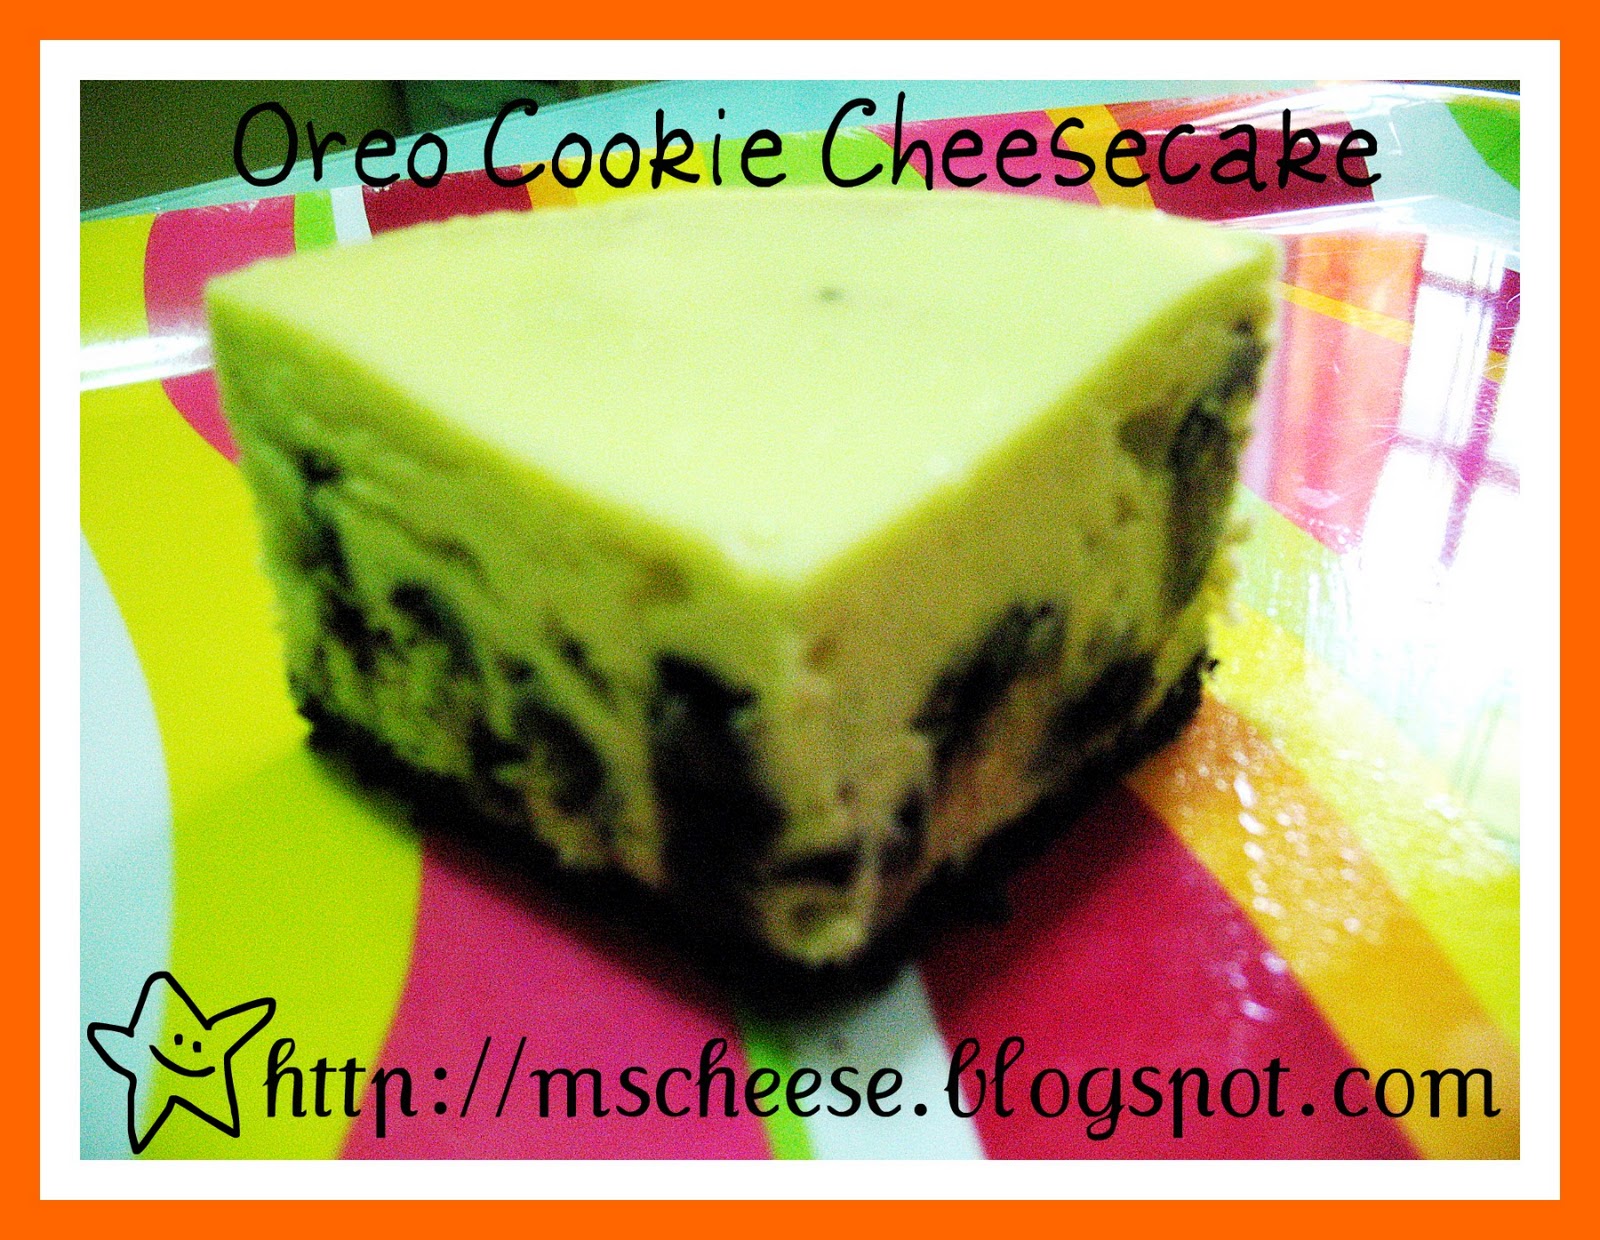 http://mscheese.blogspot.com/search/label/Oreo%20Cookie